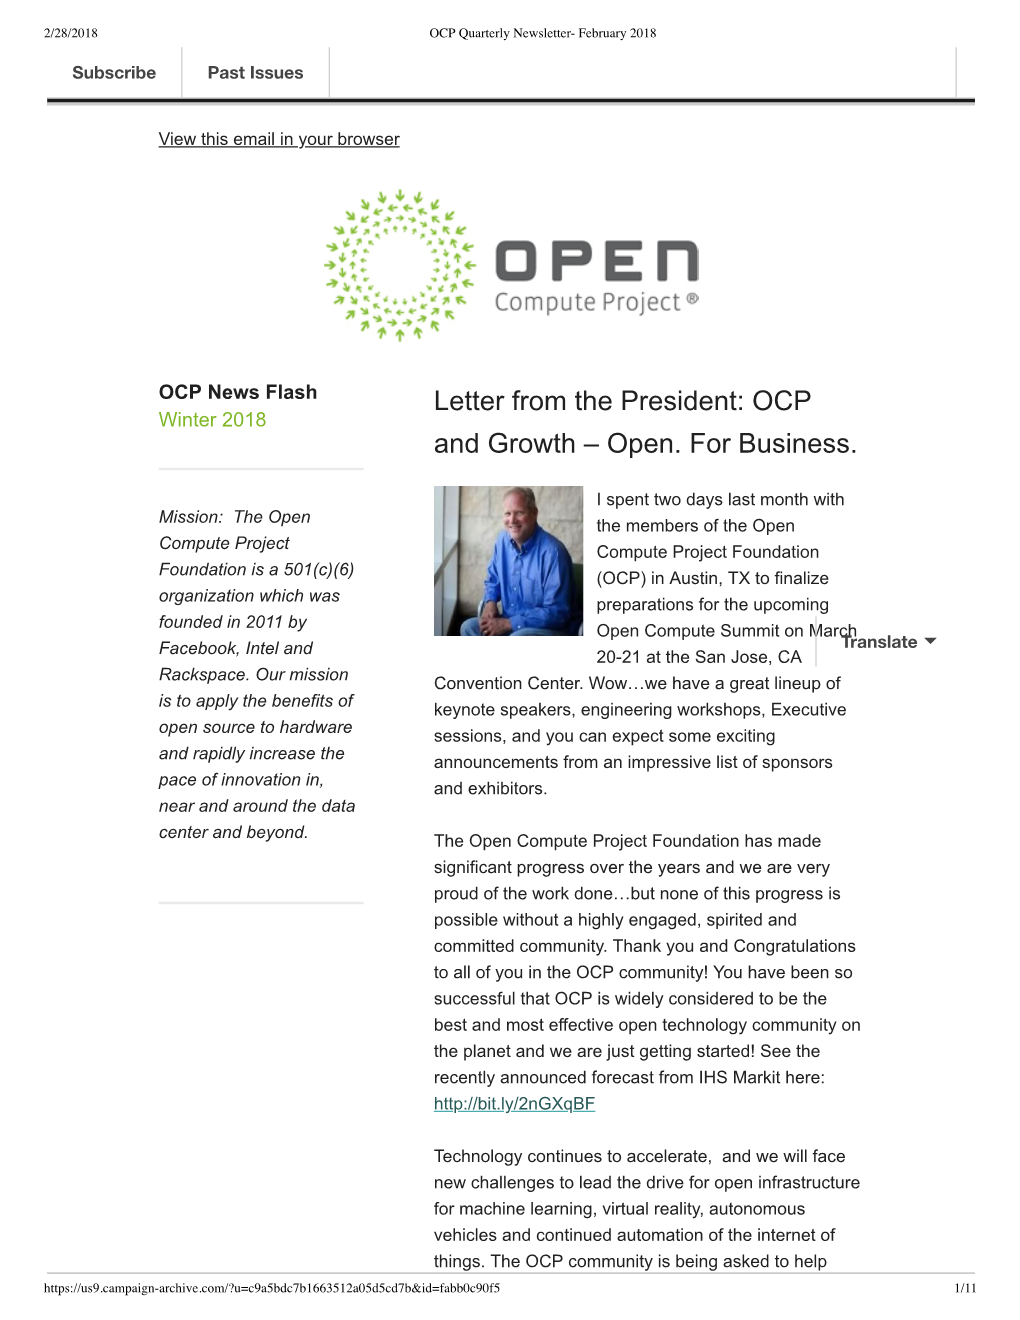 Letter from the President: OCP and Growth